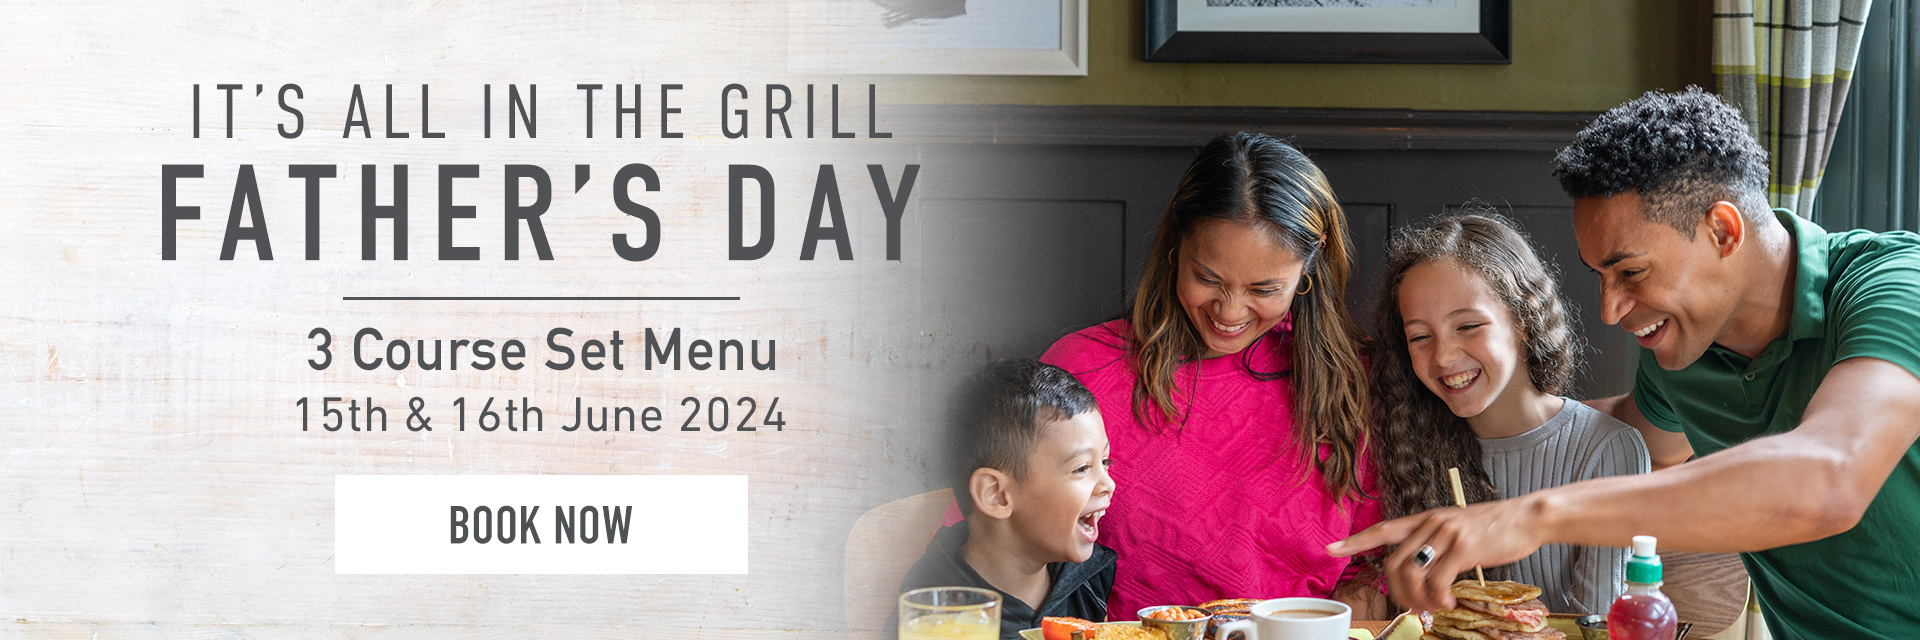 Father’s Day at Harvester Riverside